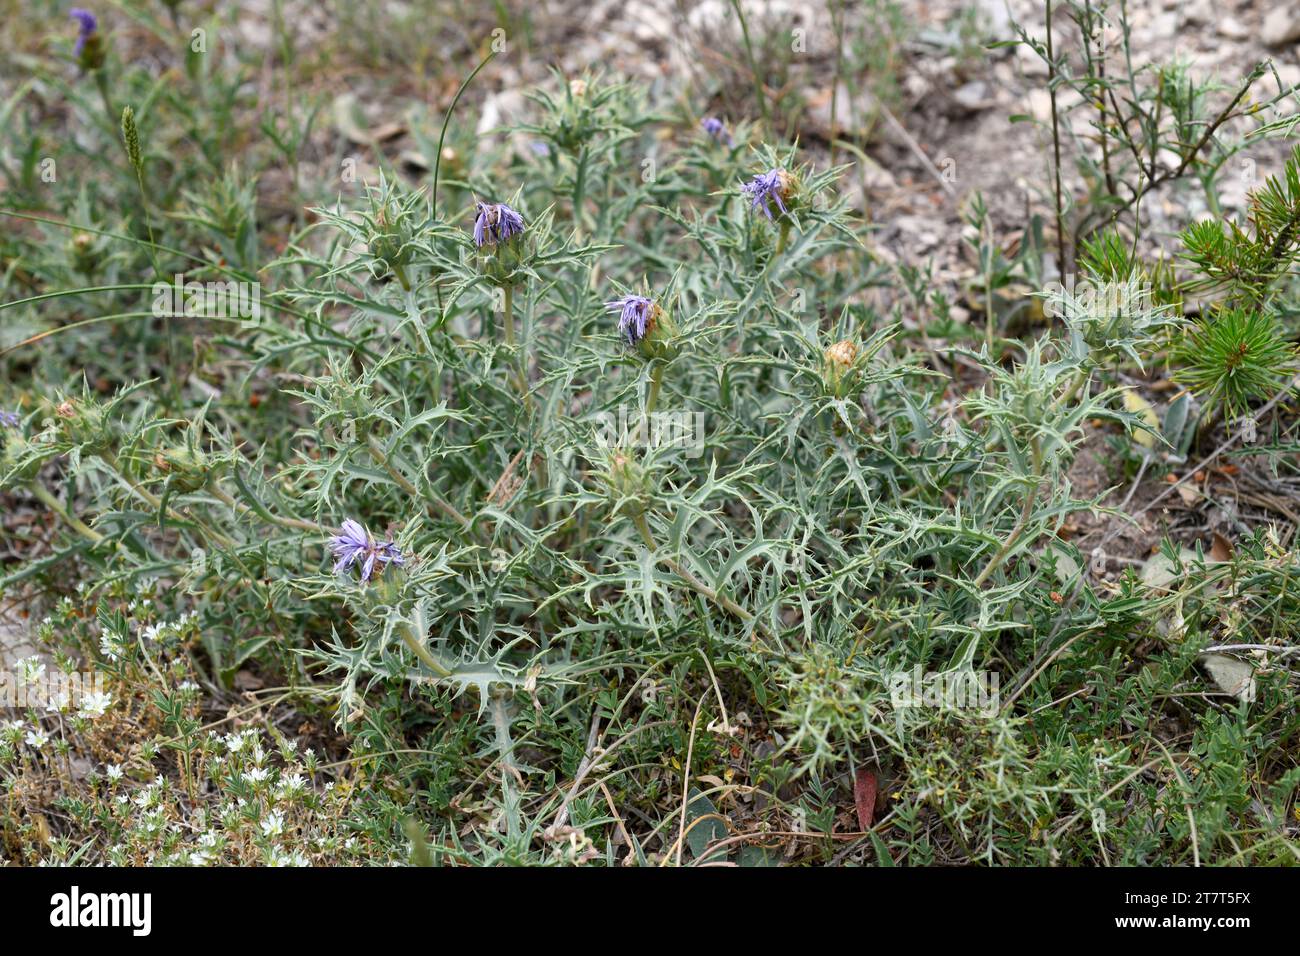 Cardillo (Carduncellus monspelliensium) is a perennial plant endemic to eastern Spain and southern France. This photo was taken in Els Ports, Tarragon Stock Photo